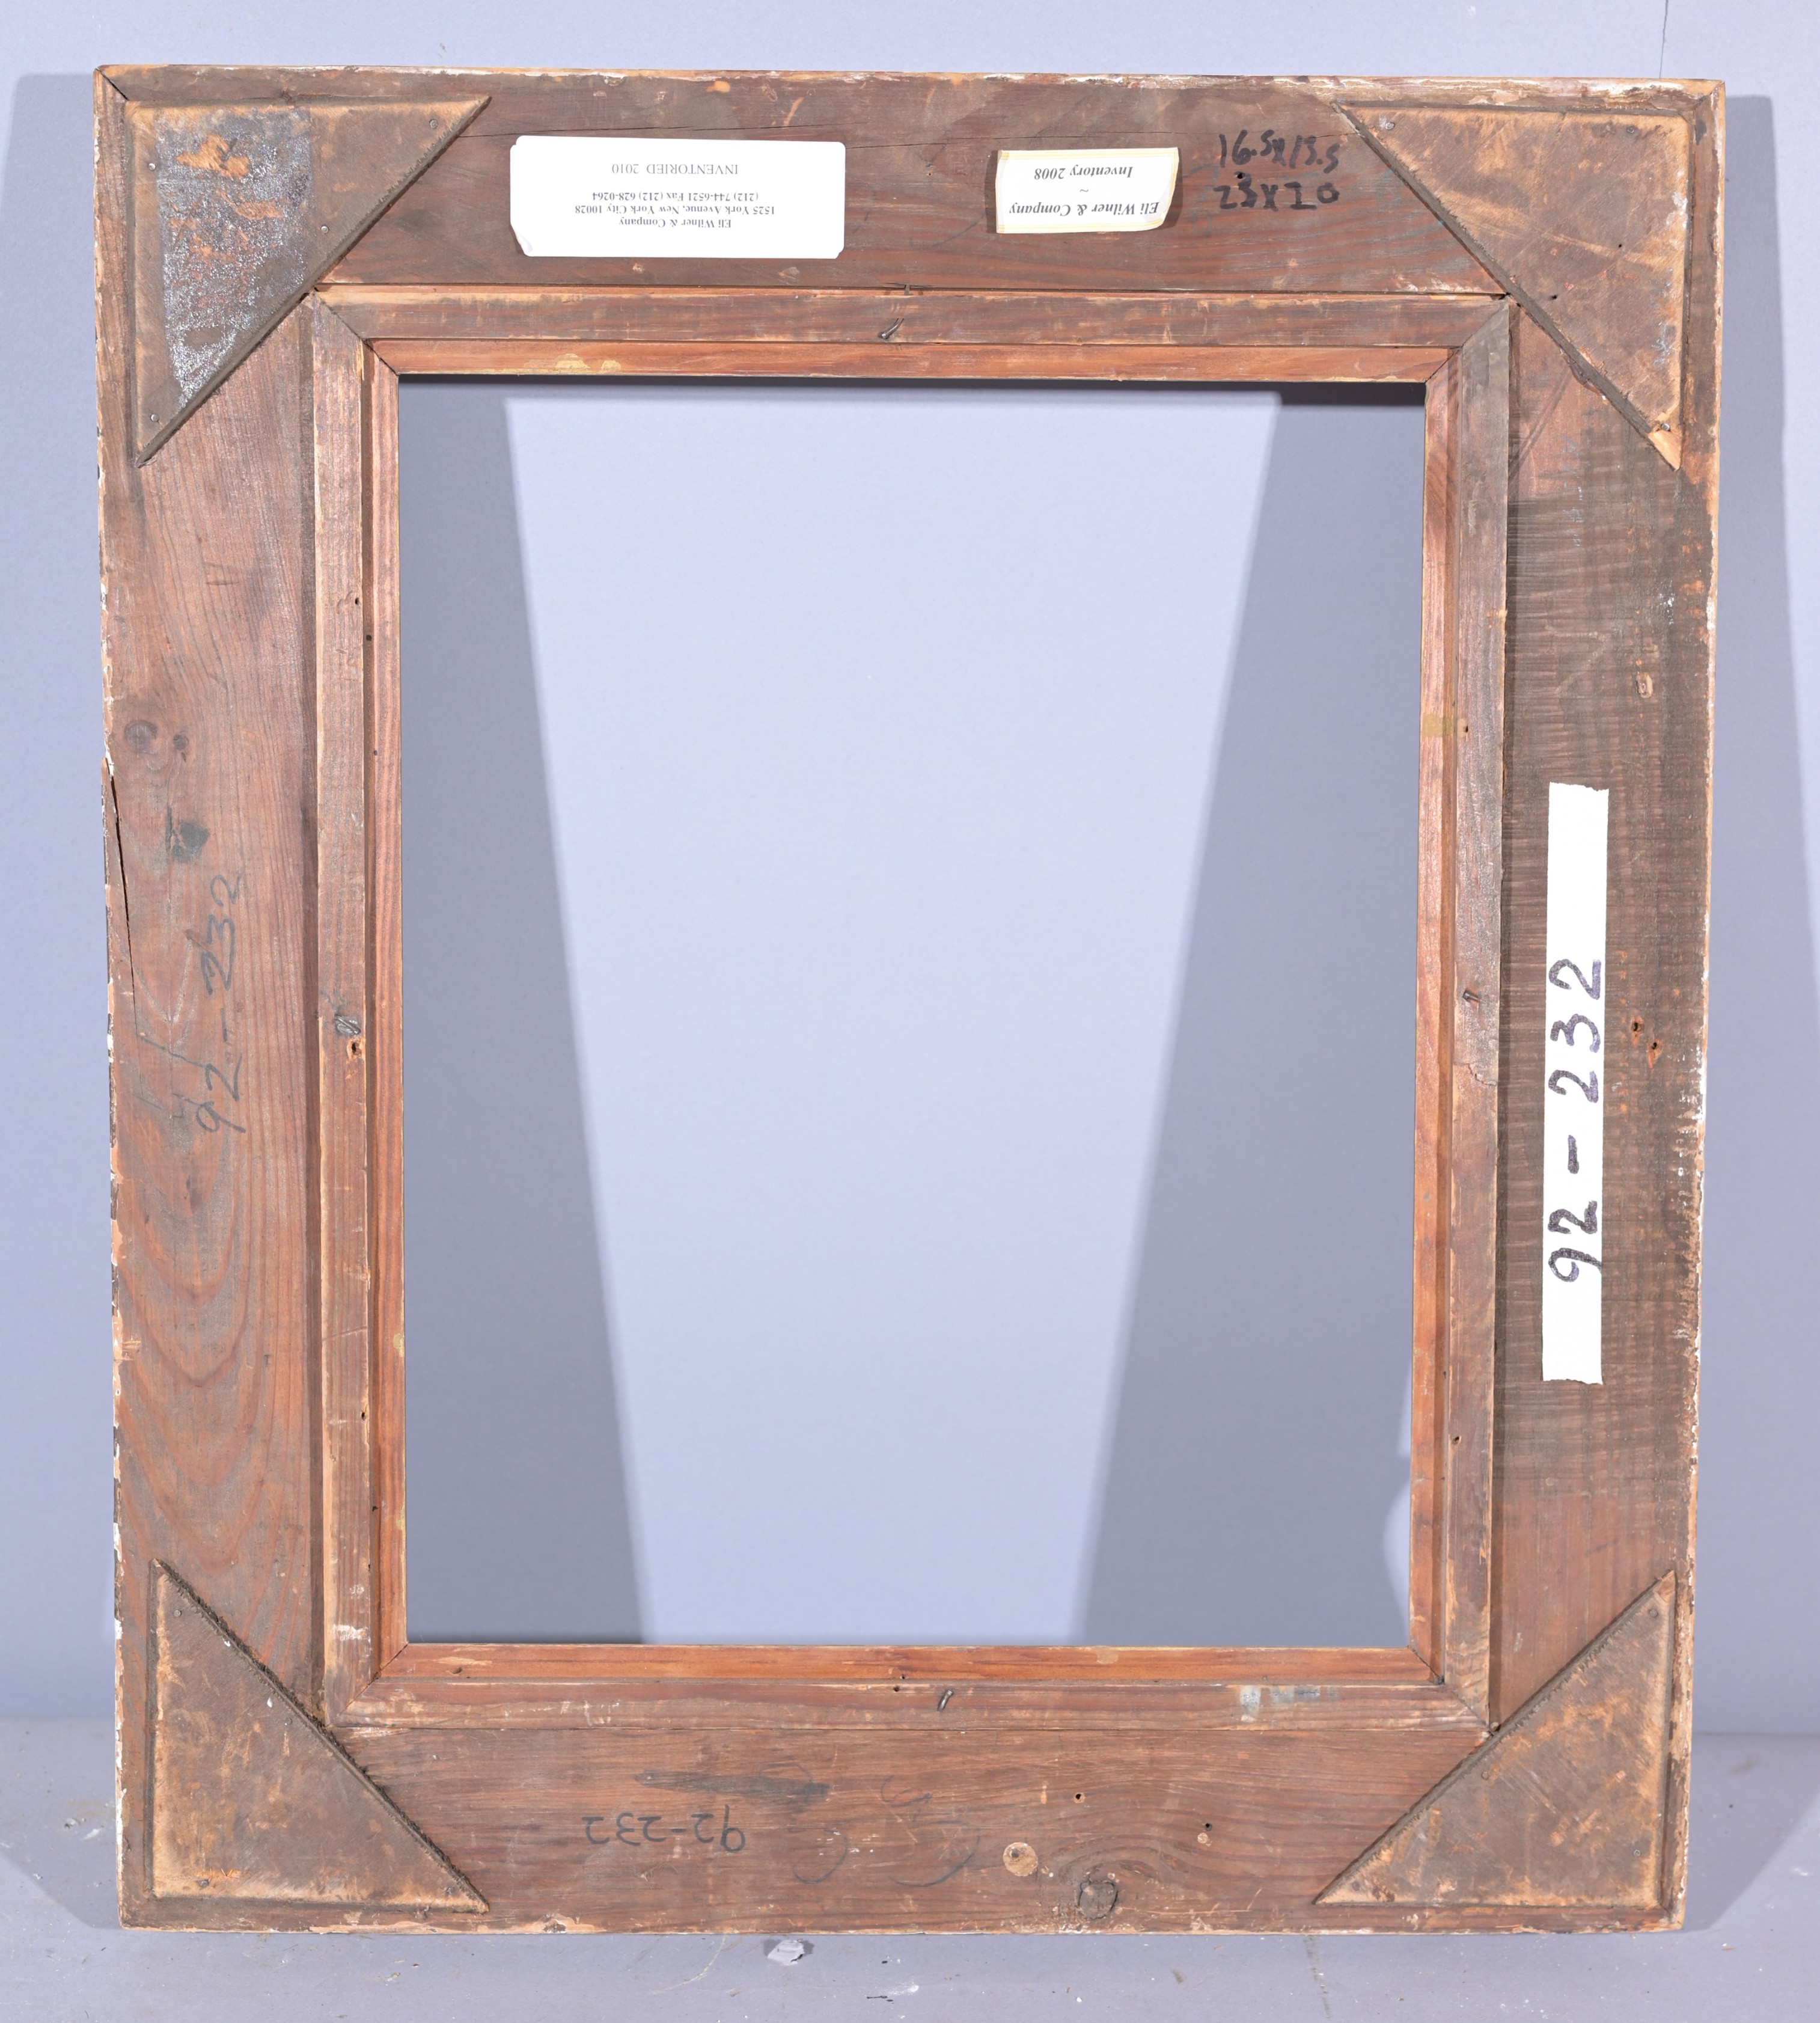 American c.1950's Frame - 16.5 x 13.5 - Image 6 of 6